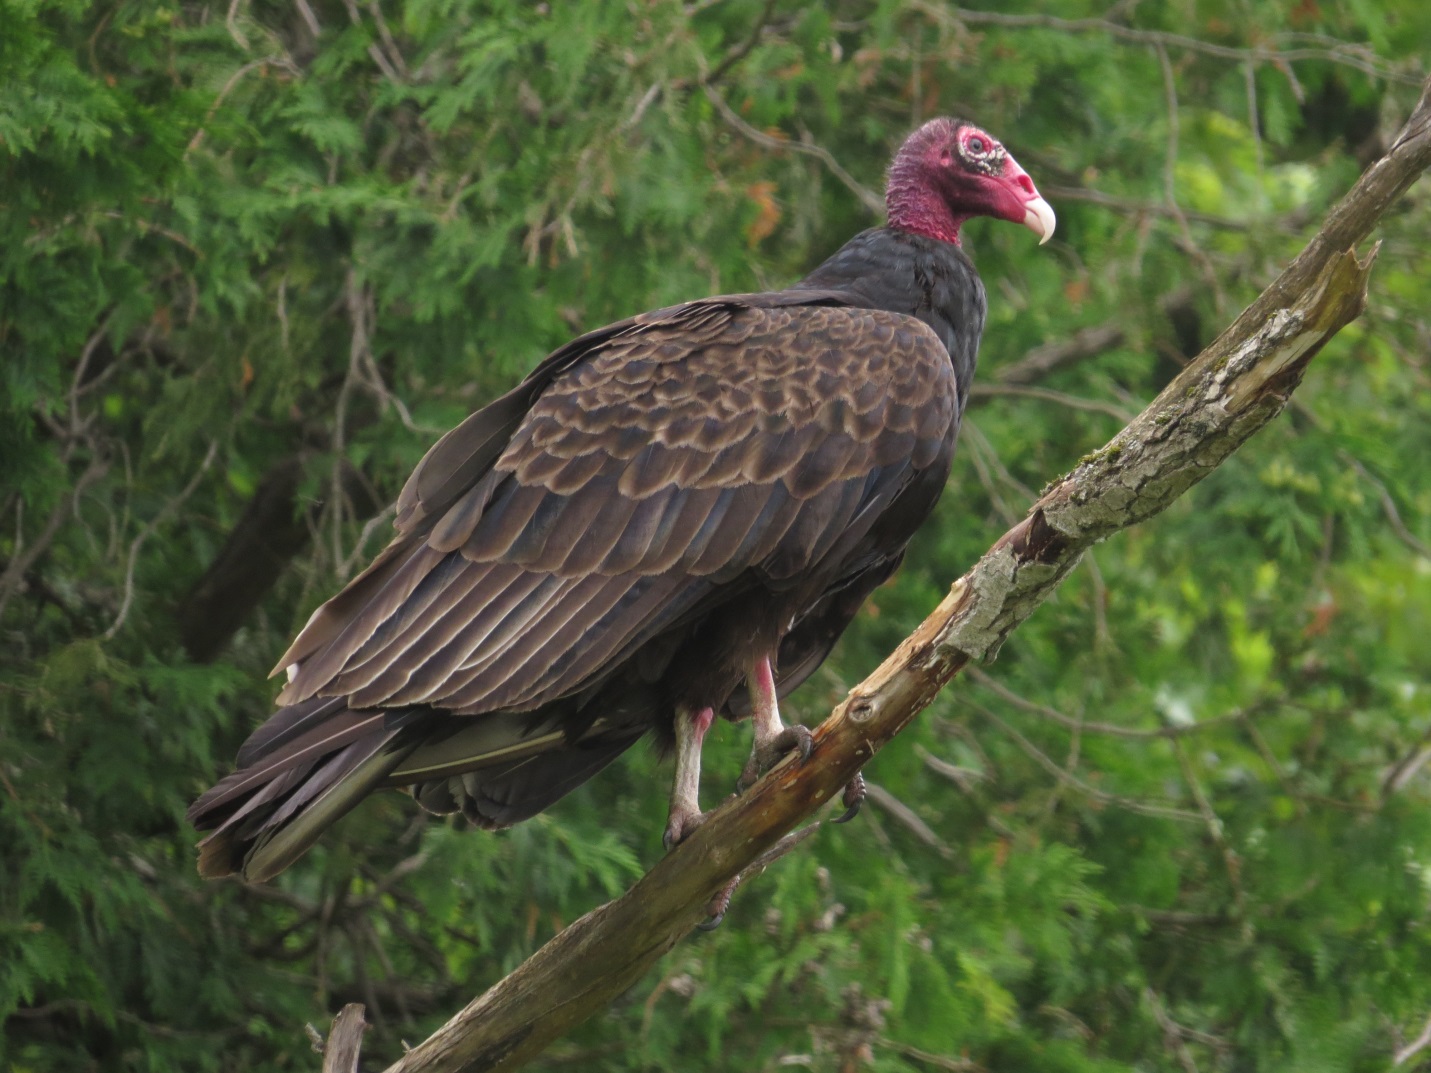 turkey vulture is an example of local flora and fauna in TRCA watersheds